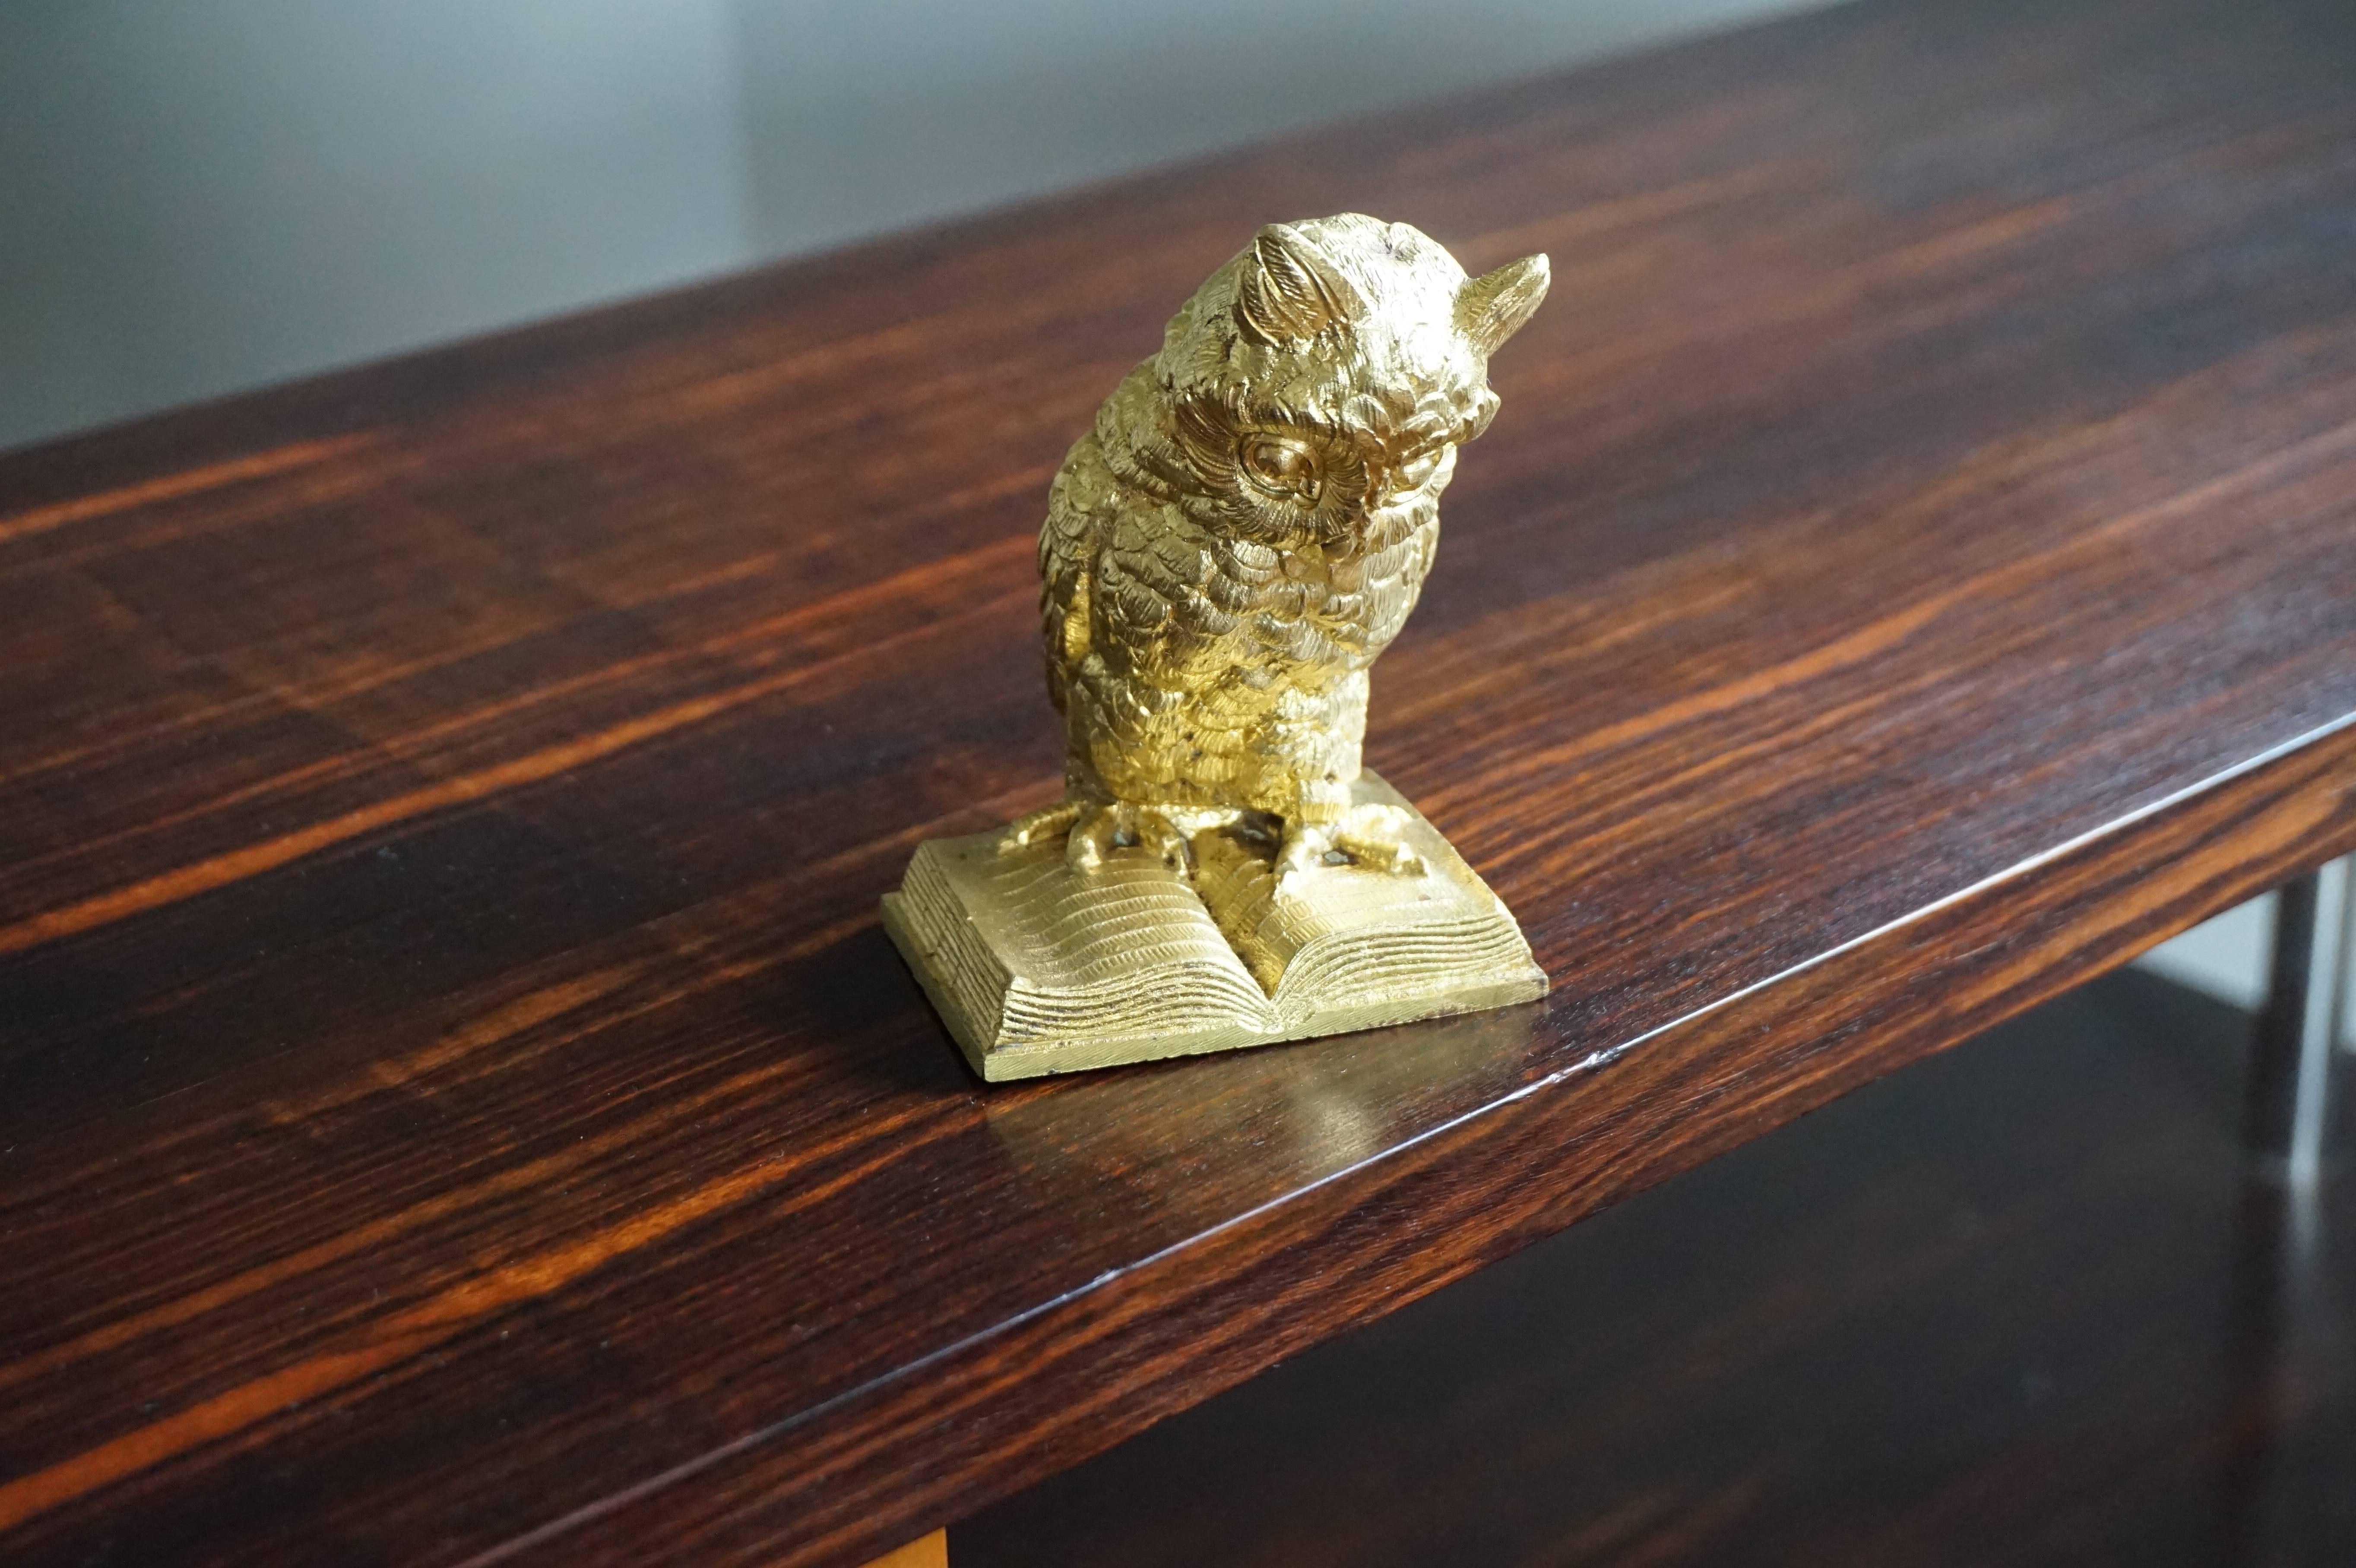 Late 19th Century Small Antique Gilt Bronze Owl on Book Sculpture, Paperweight 1